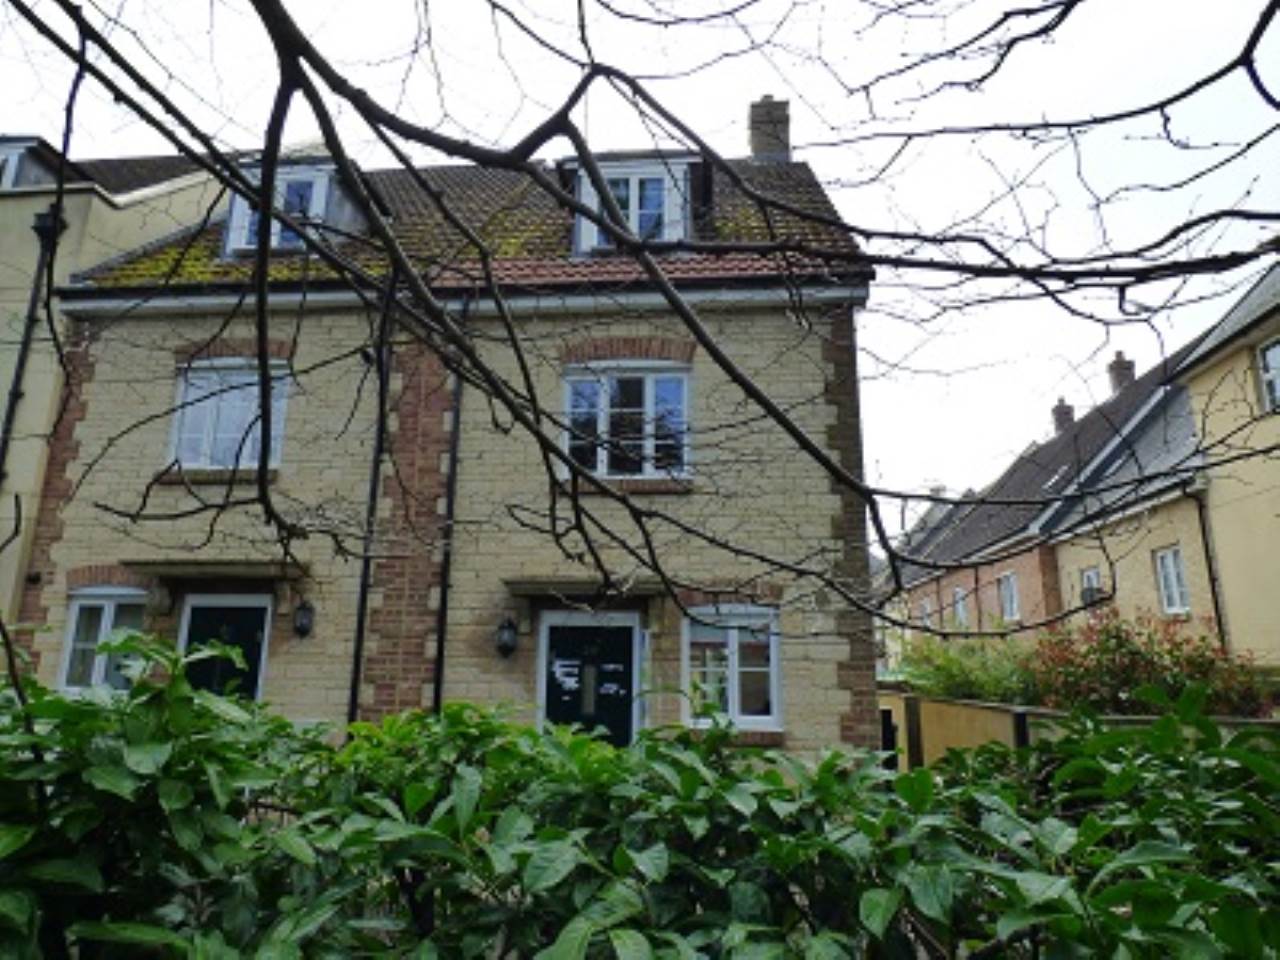 3 bed House (unspecified) for rent in Wincanton. From Lettings-R-Us Frome